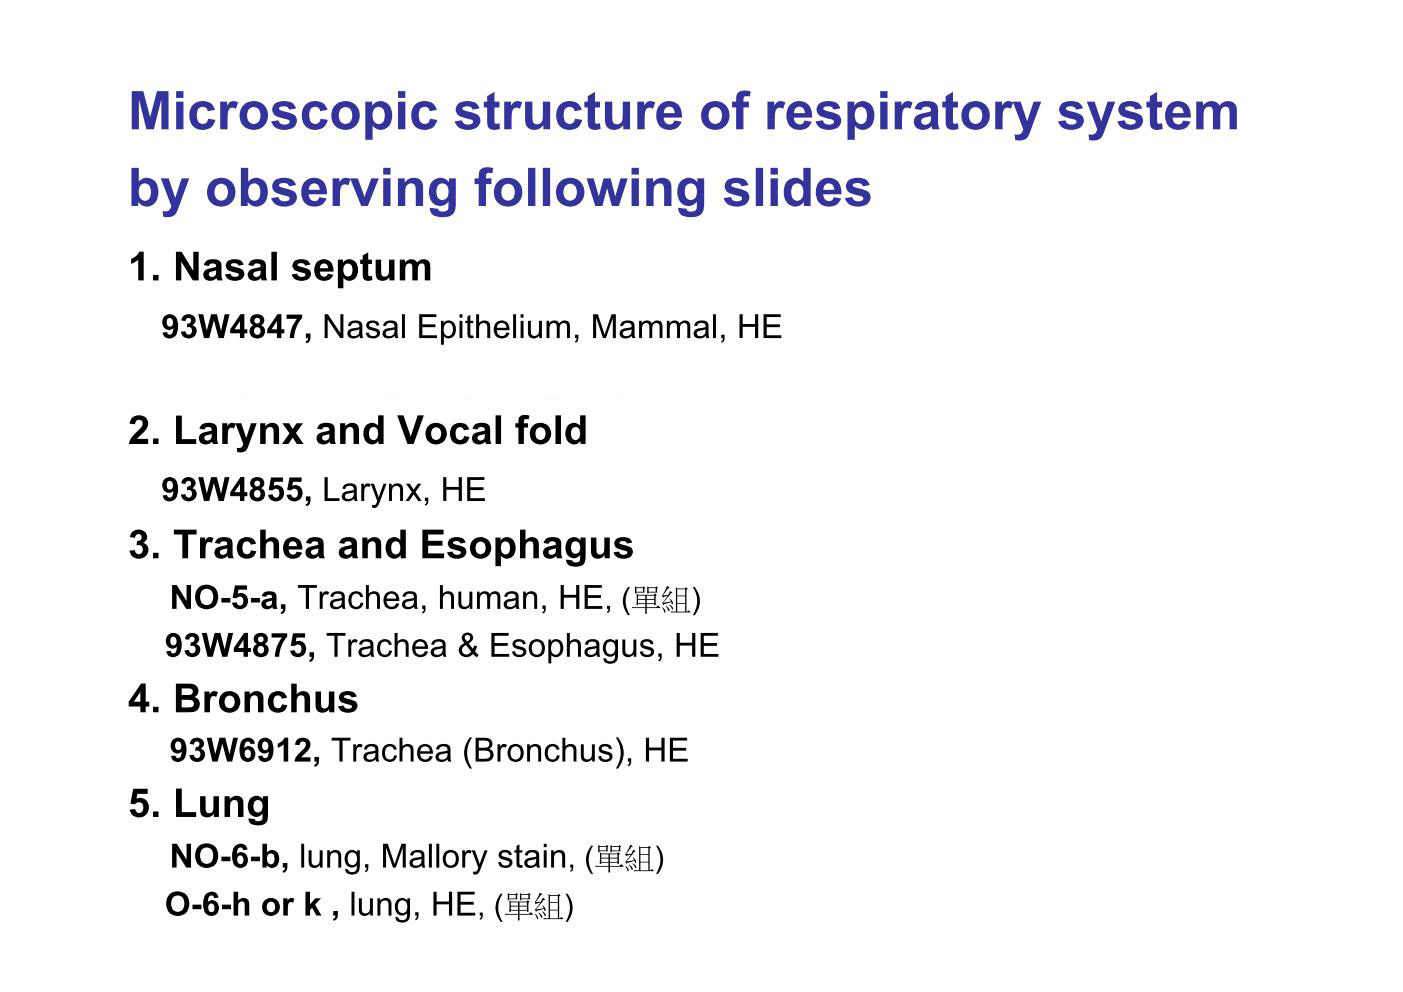 block9_03.jpg - Microscopic structure of respiratory systemby observing following slides1. Nasal septum 93W4847, Nasal Epithelium, Mammal, HE O-2-a, Nasal septum, HE, (³æ²Õ)2. Larynx and Vocal fold 93W4855, Larynx, HE3. Trachea and Esophagus NO-5-a, Trachea, human, HE, (³æ²Õ) 93W4875, Trachea & Esophagus, HE4. Bronchus  93W6912, Trachea (Bronchus), HE5. Lung NO-6-b, lung, Mallory stain, (³æ²Õ) O-6-h or k , lung, HE, (³æ²Õ)